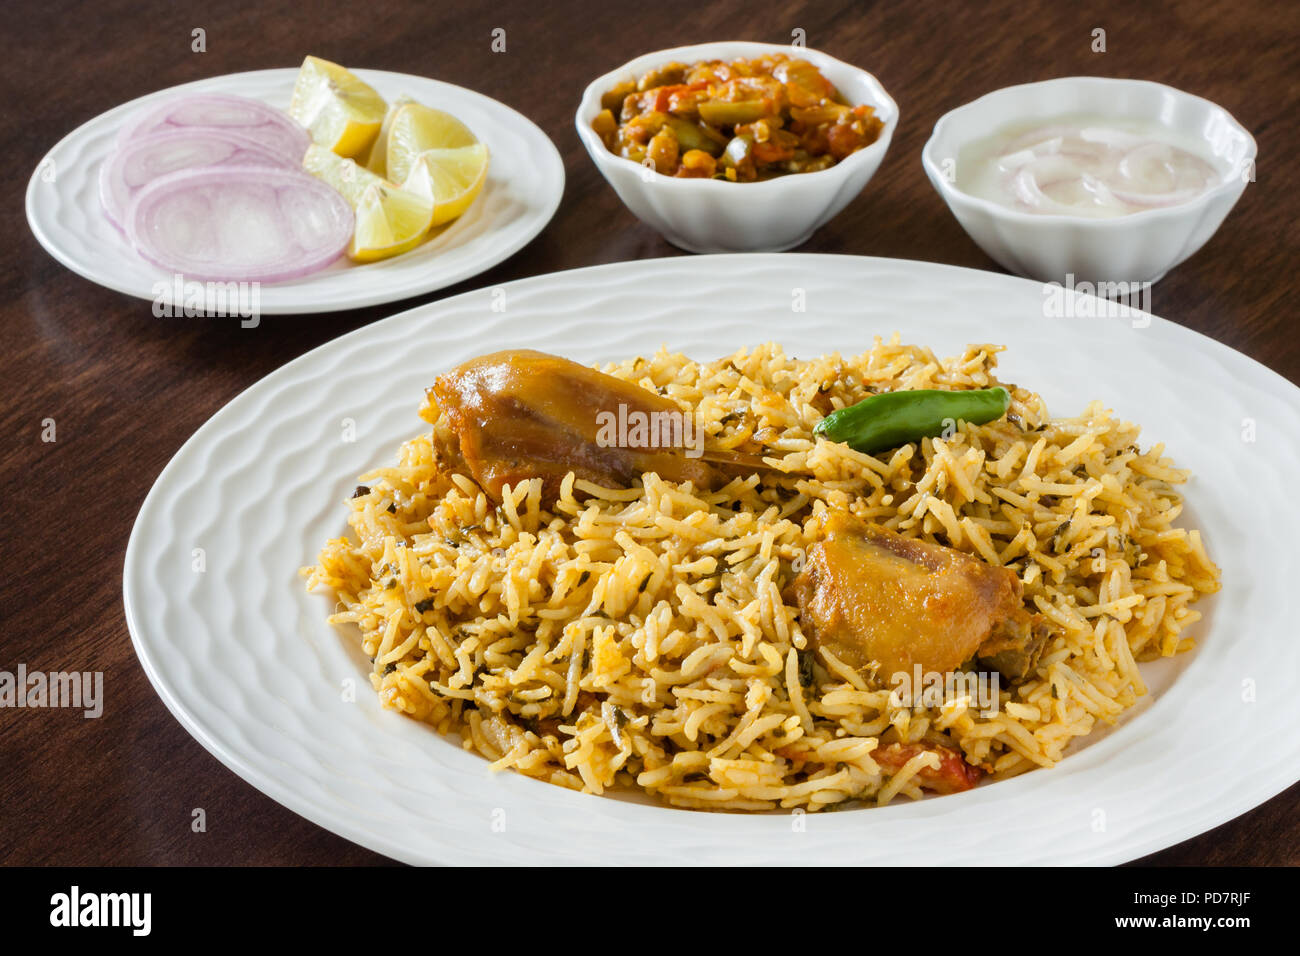 Closeup view from the top of delicious Indian chicken biryani served with traditional sides, salad (raita) and gravy. Natural light used. Stock Photo